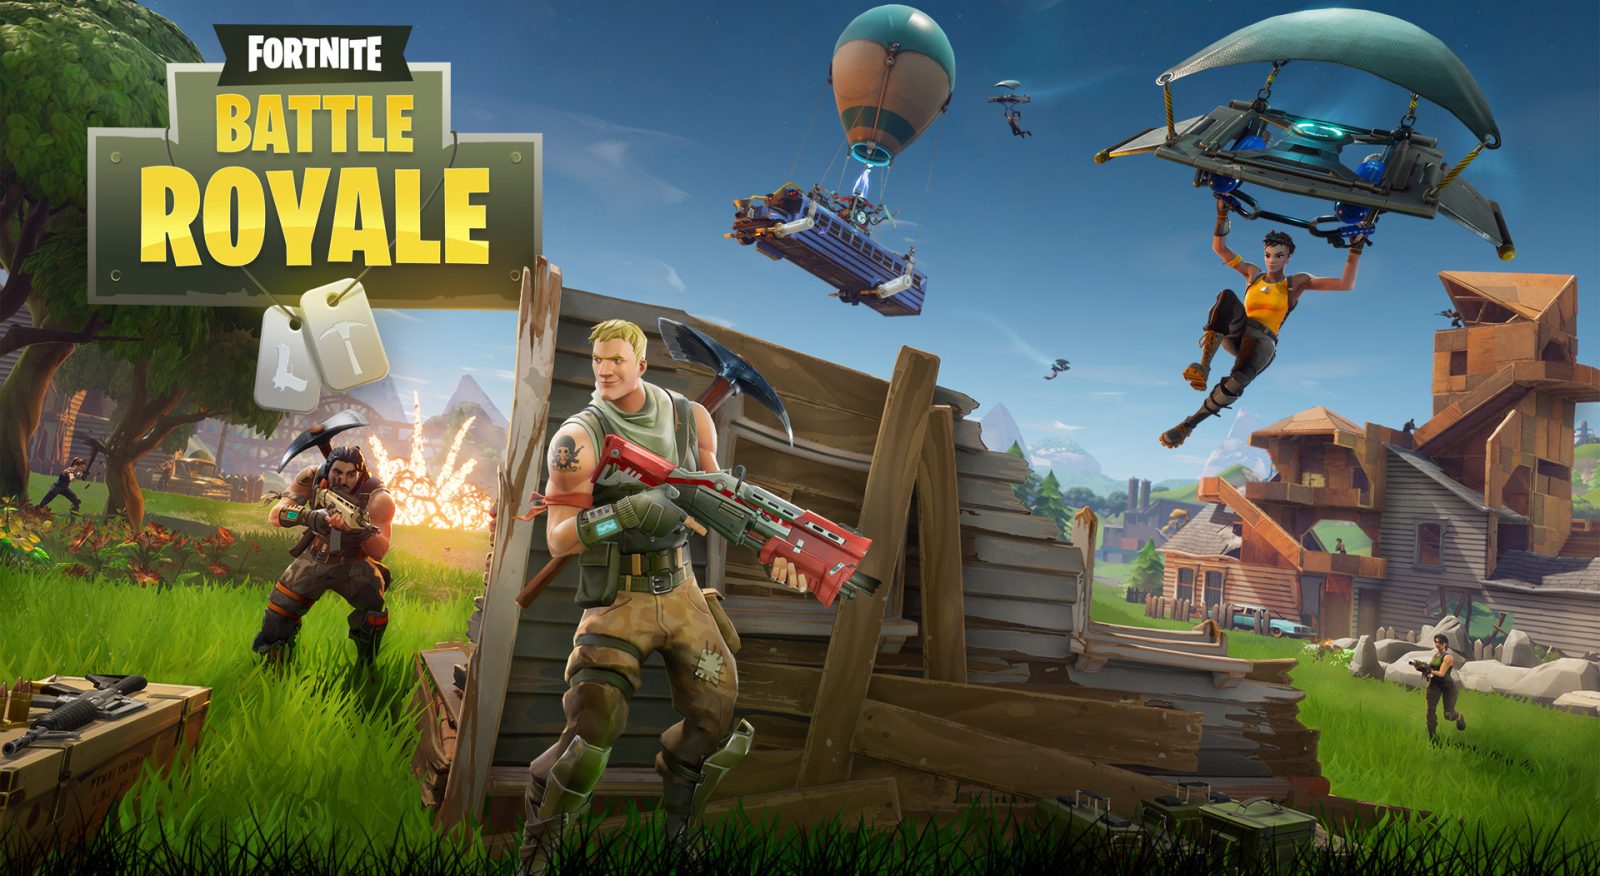 you can play fortnite on nintendo switch for free download now on the eshop - fortnite free download switch